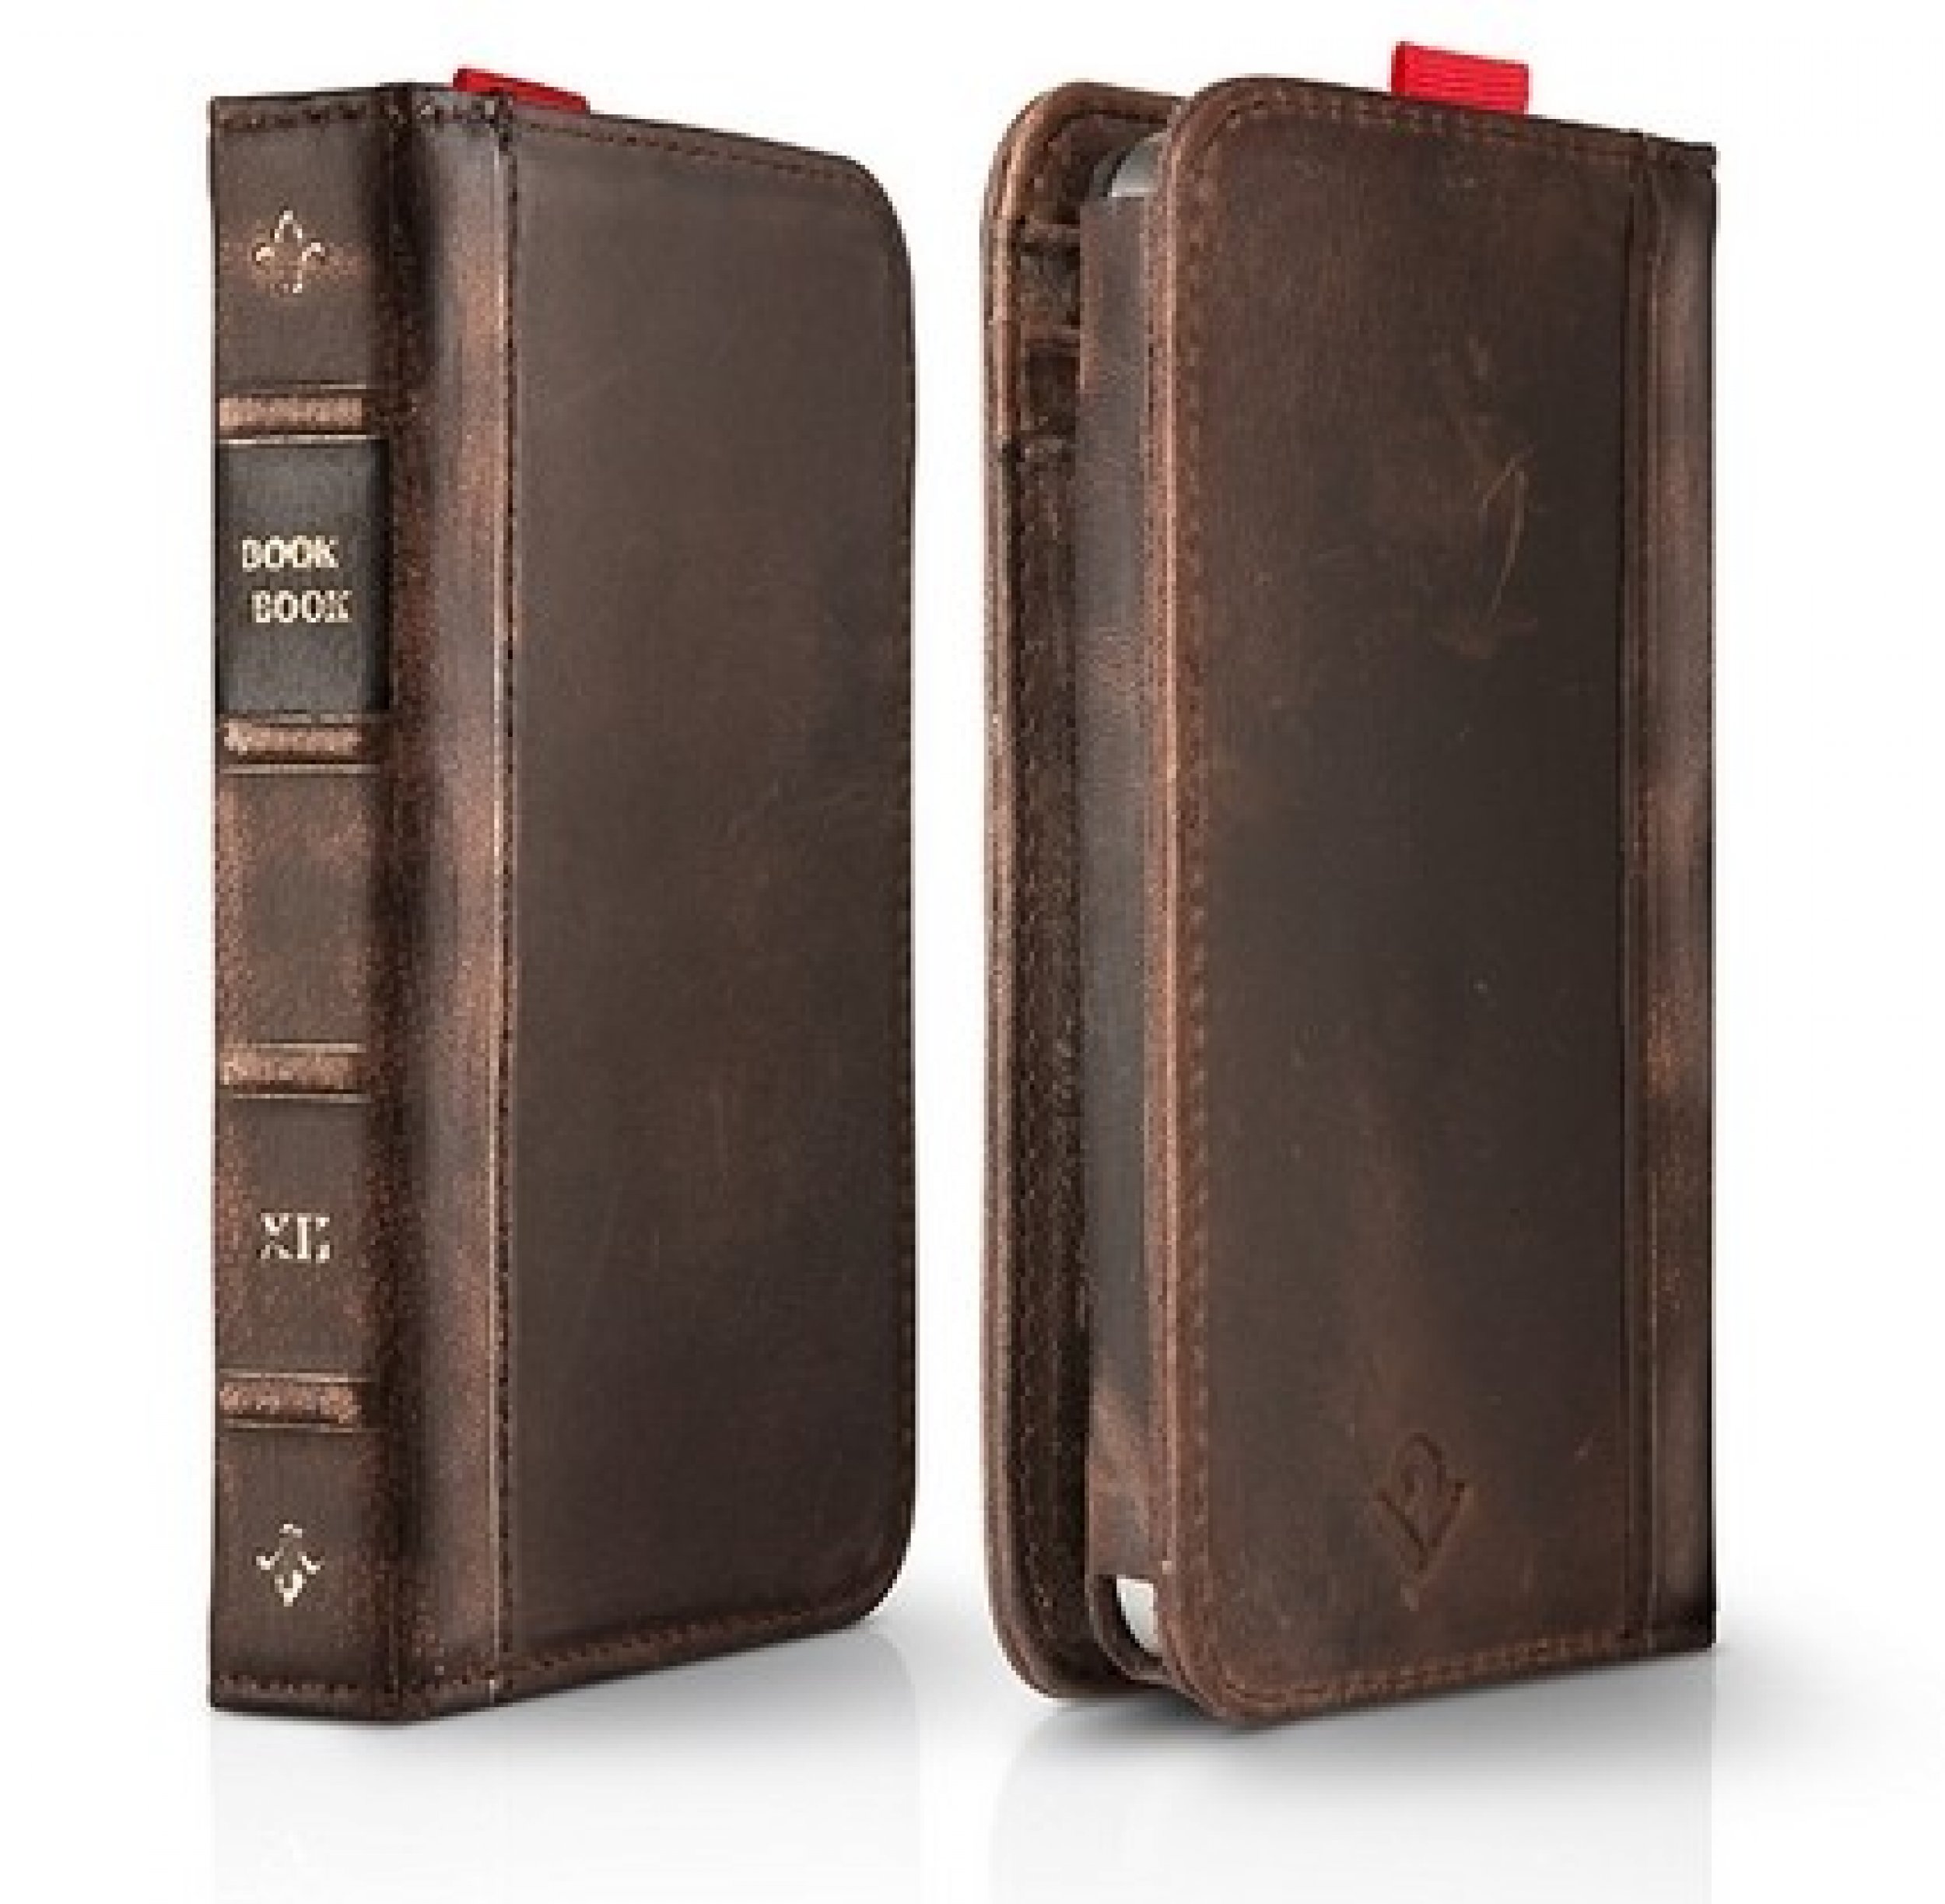 BookBook for iPhone from Twelve South